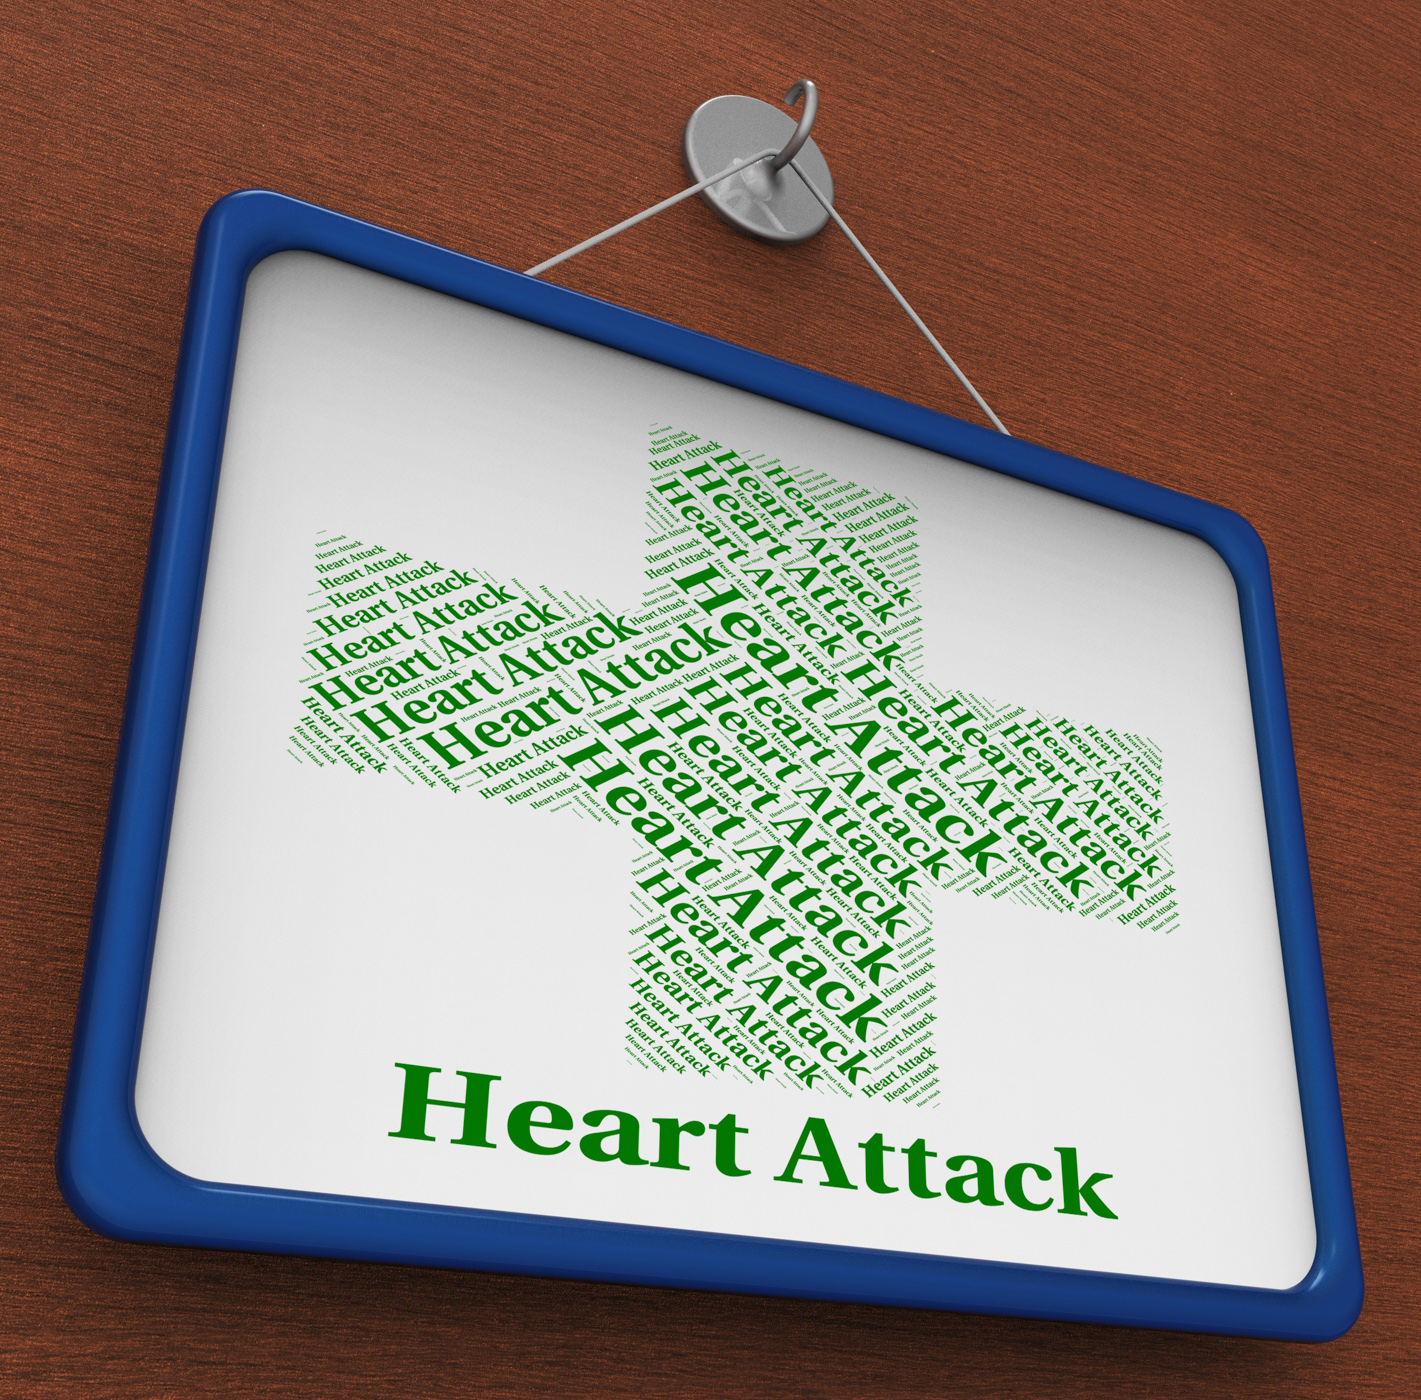 Heart Attack Means Acute Myocardial Infarction And Afflictions, Disability, Indisposition, Illness, Illhealth, HQ Photo